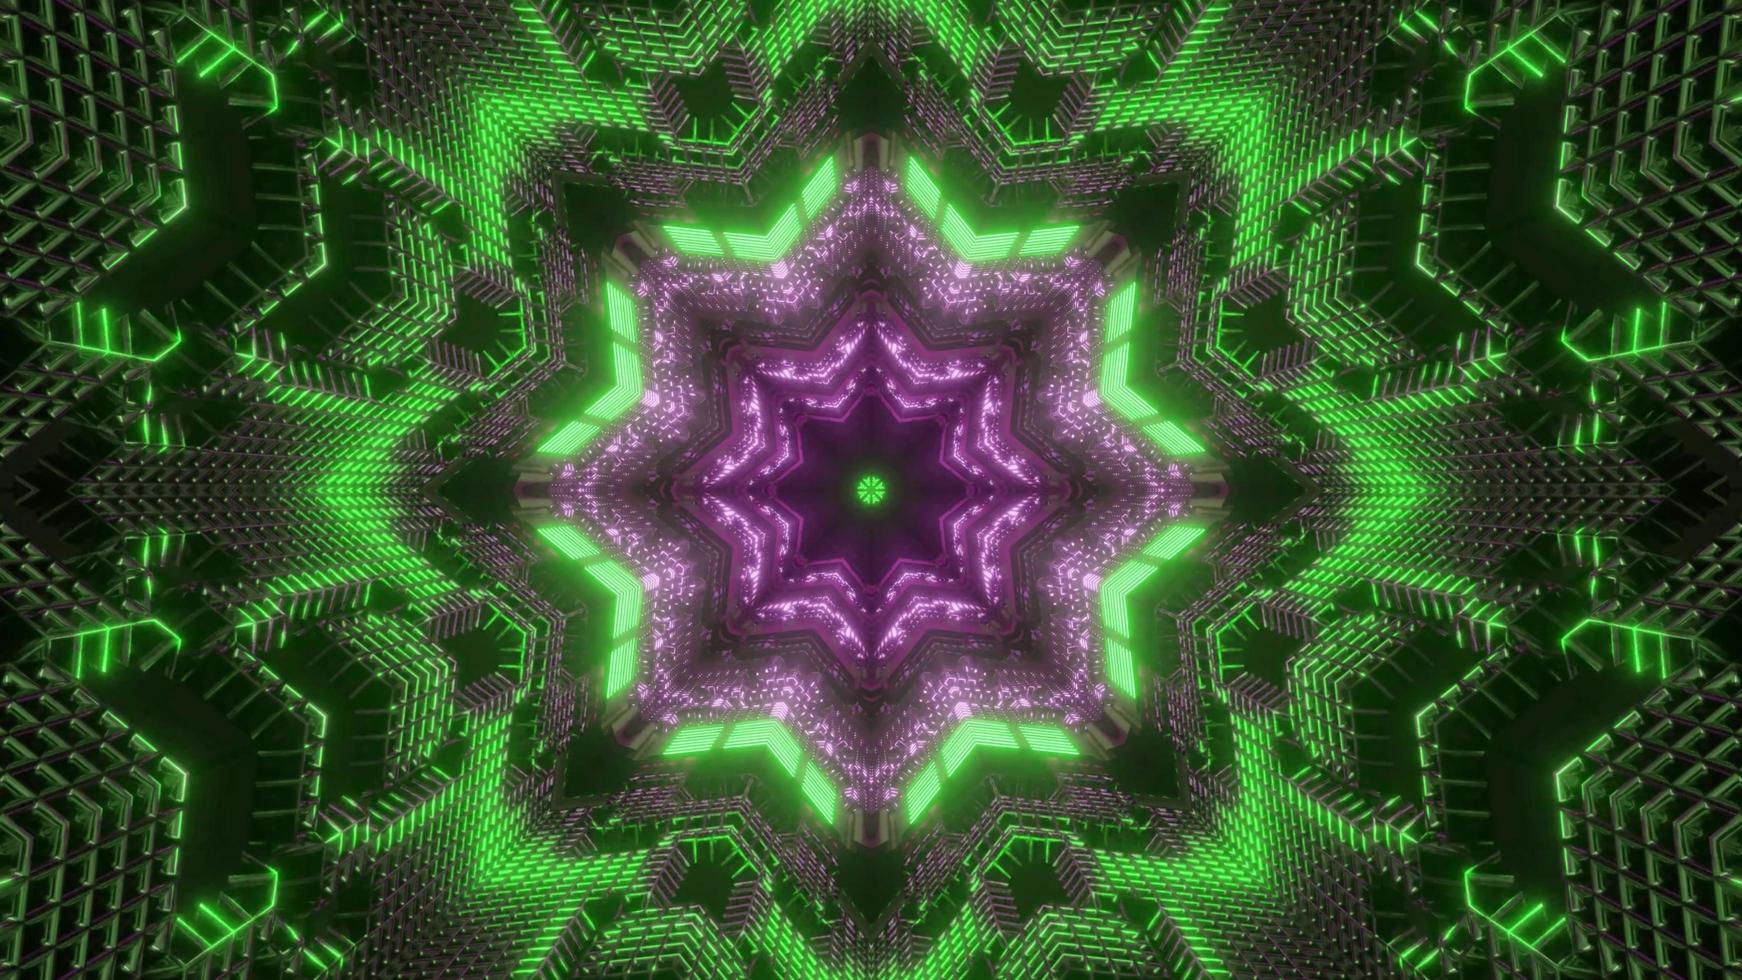 Green, purple, and white lights and shapes kaleidoscope 3d illustration for background or wallpaper photo